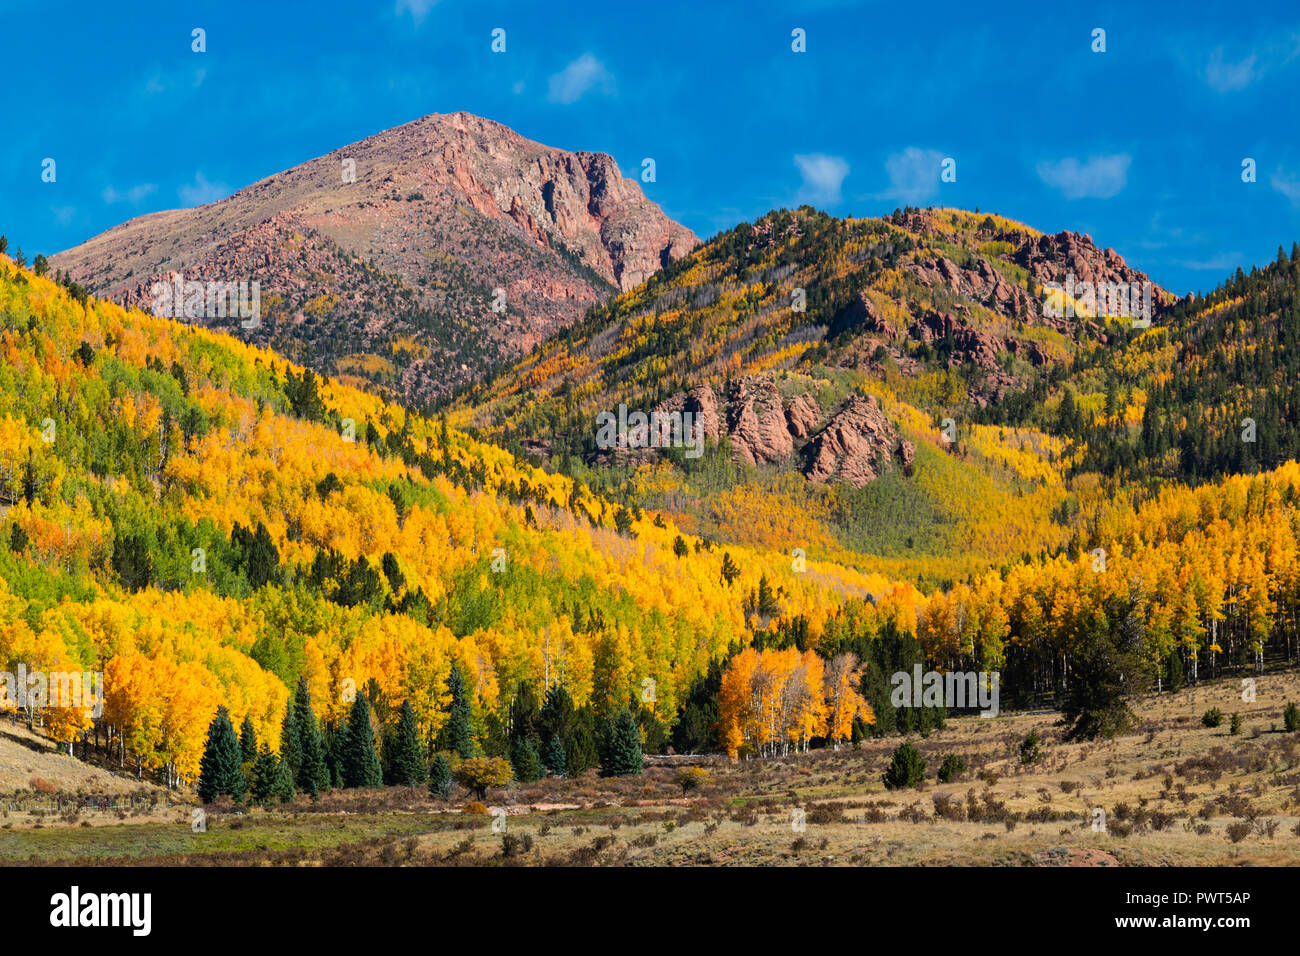 Aspen leaves turn gold and red for autumn in the Cripple Creek / Victor ...